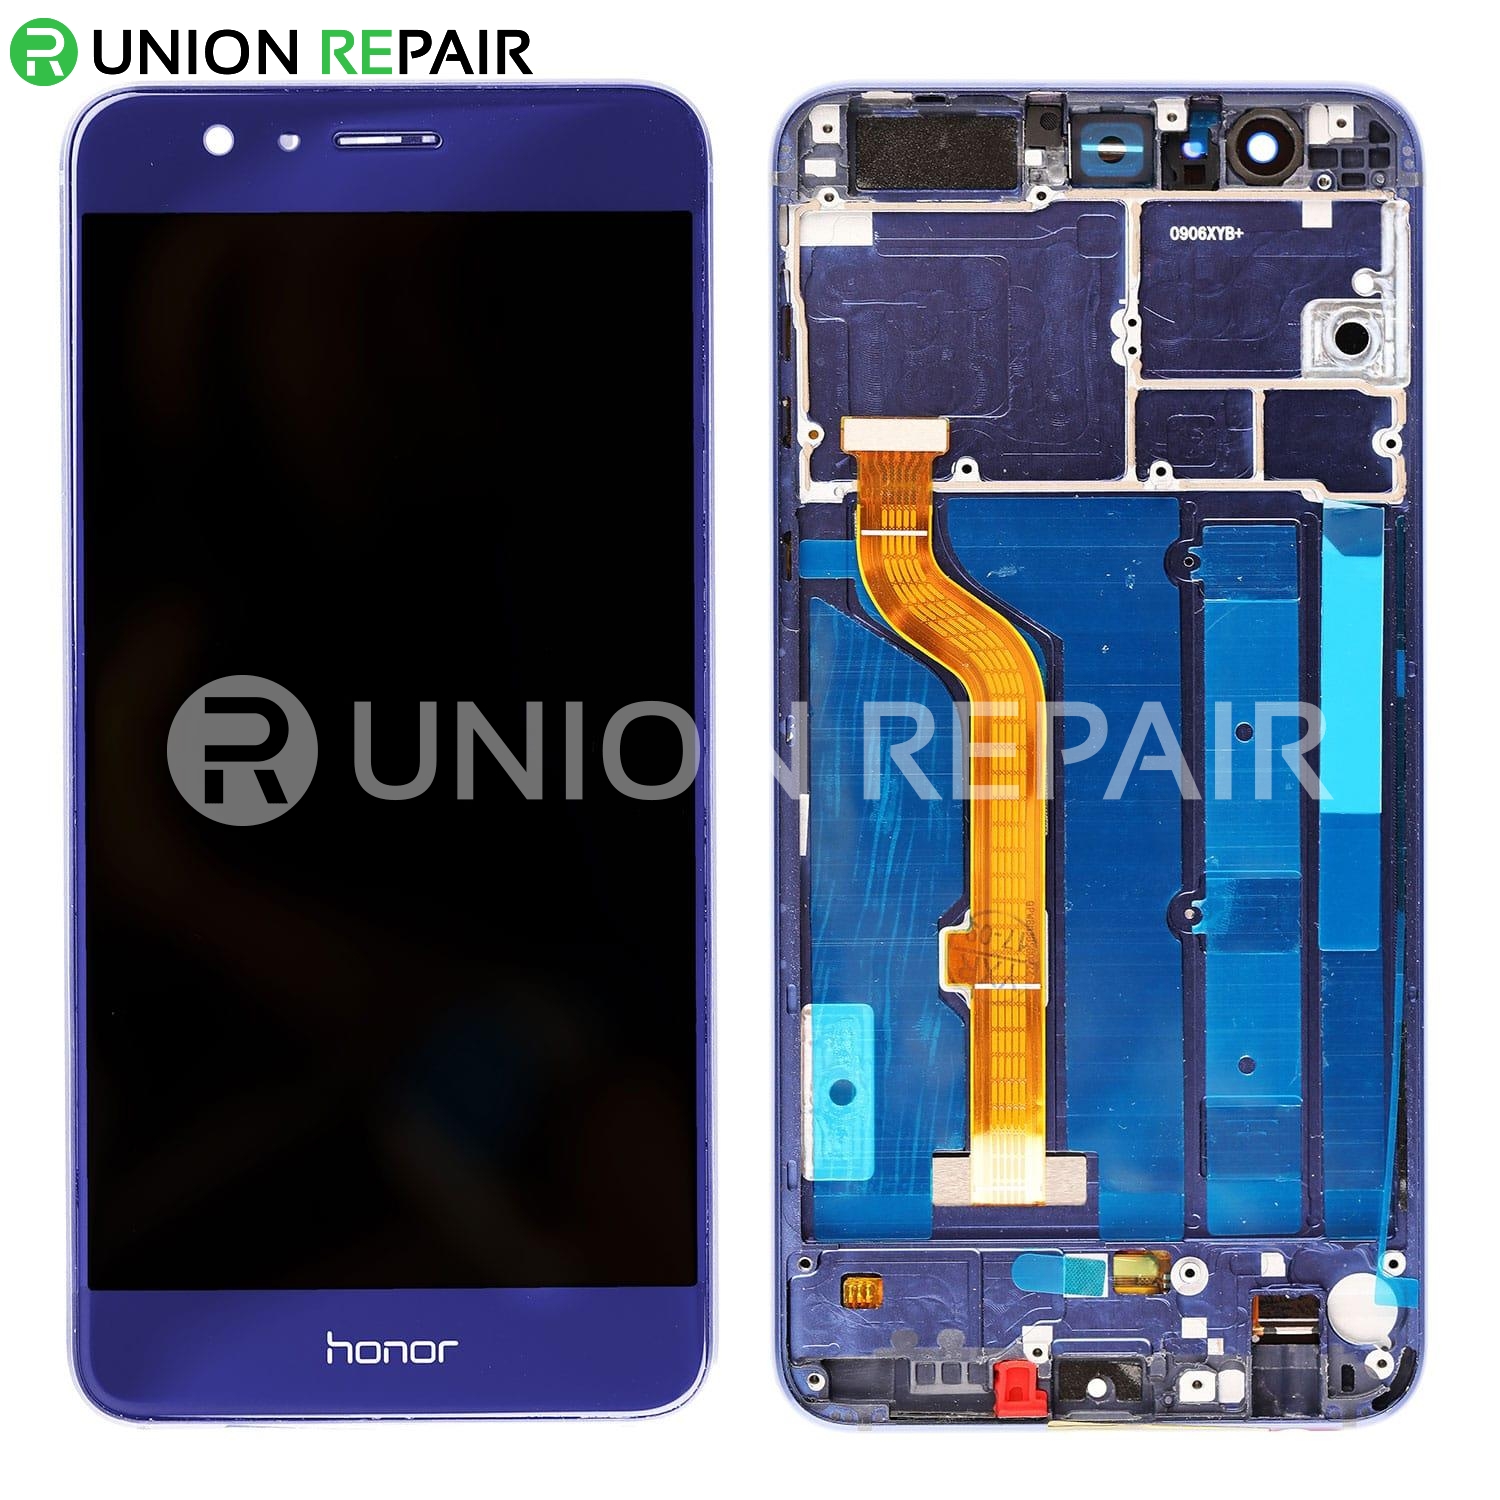 Replacement for Huawei Honor 8 LCD Screen Digitizer with Frame - Blue